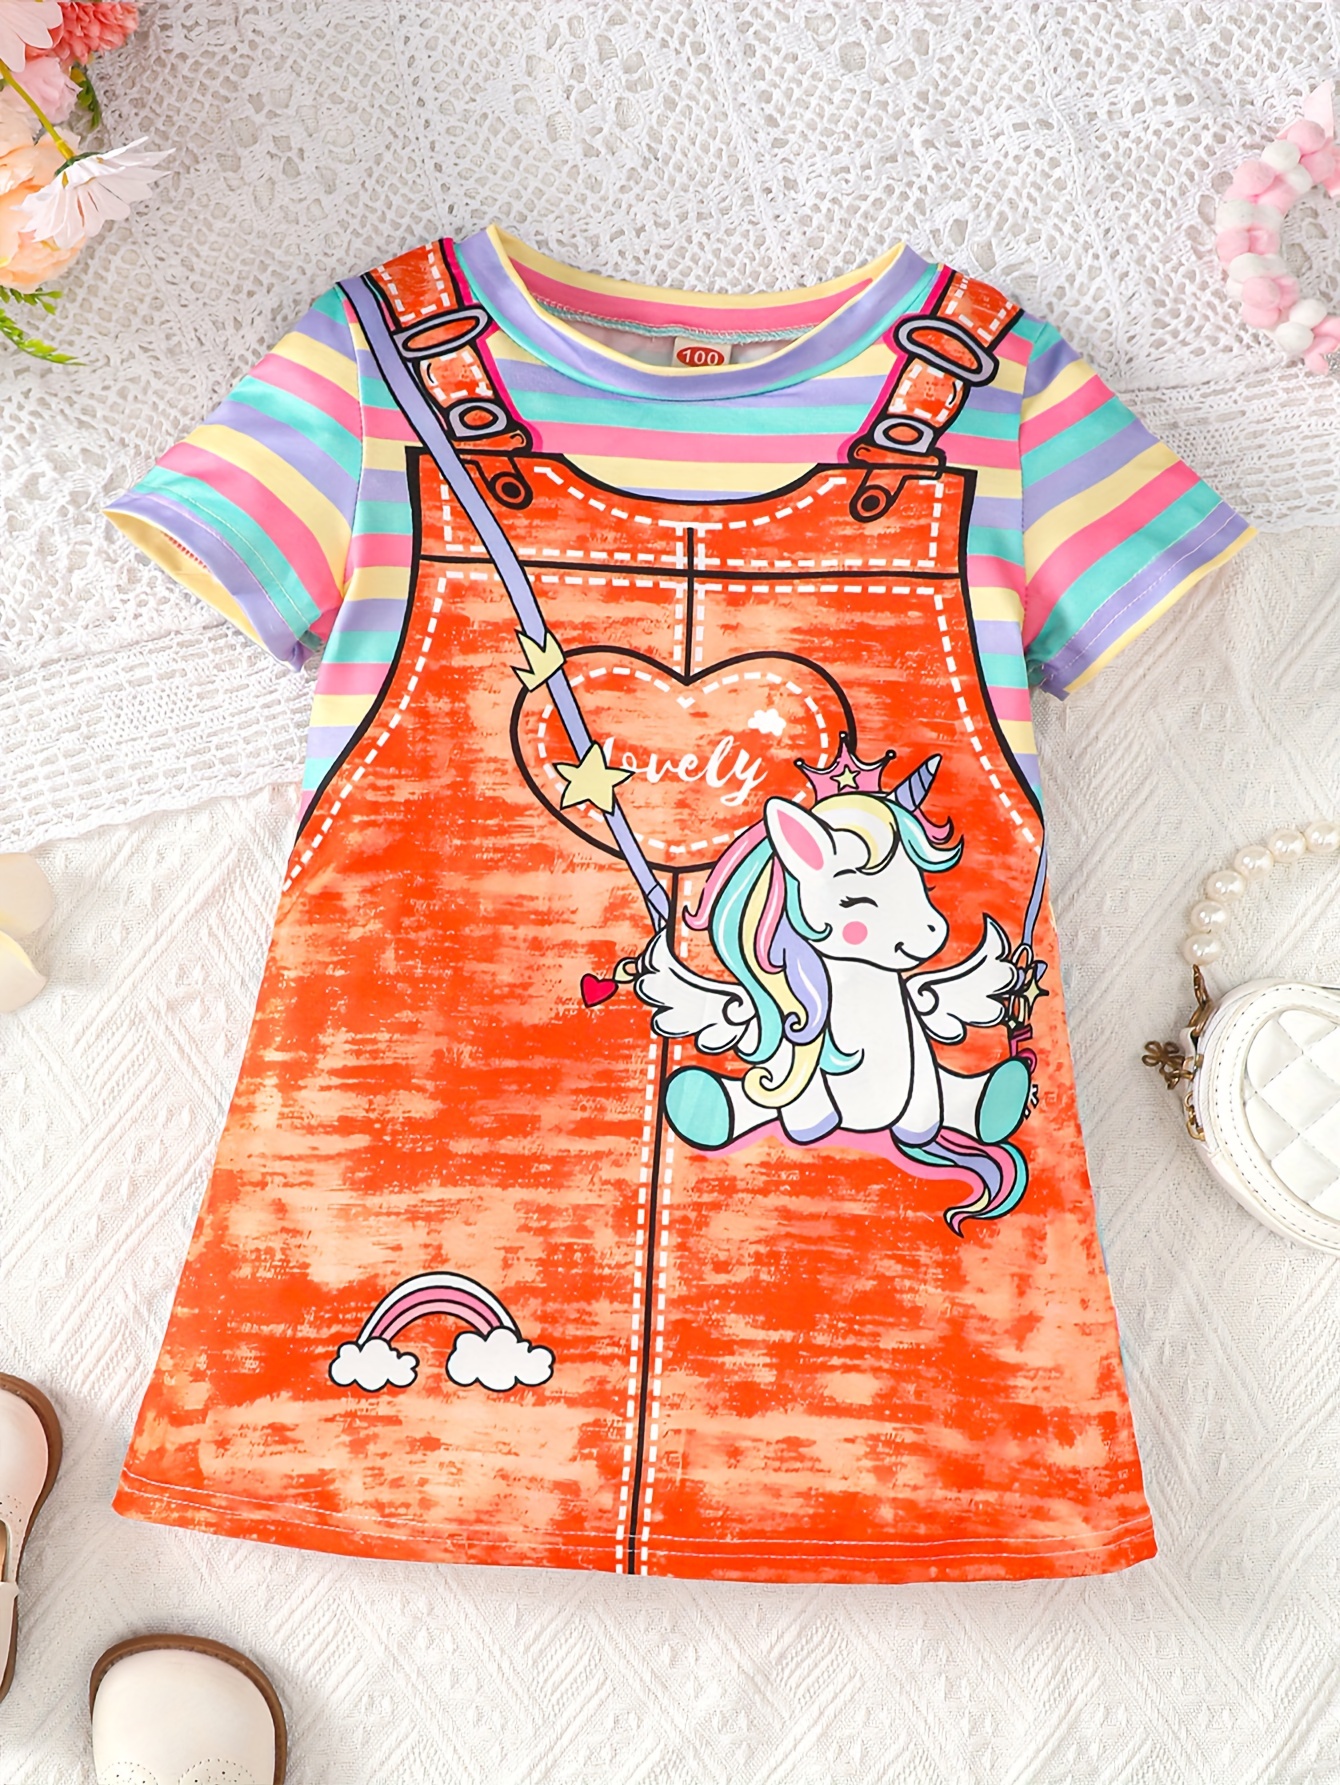 Toddler Girls Rainbow Stripe And Unicorn Graphic Cotton Casual T-shirt  Dress For Party Kids Summer Clothes